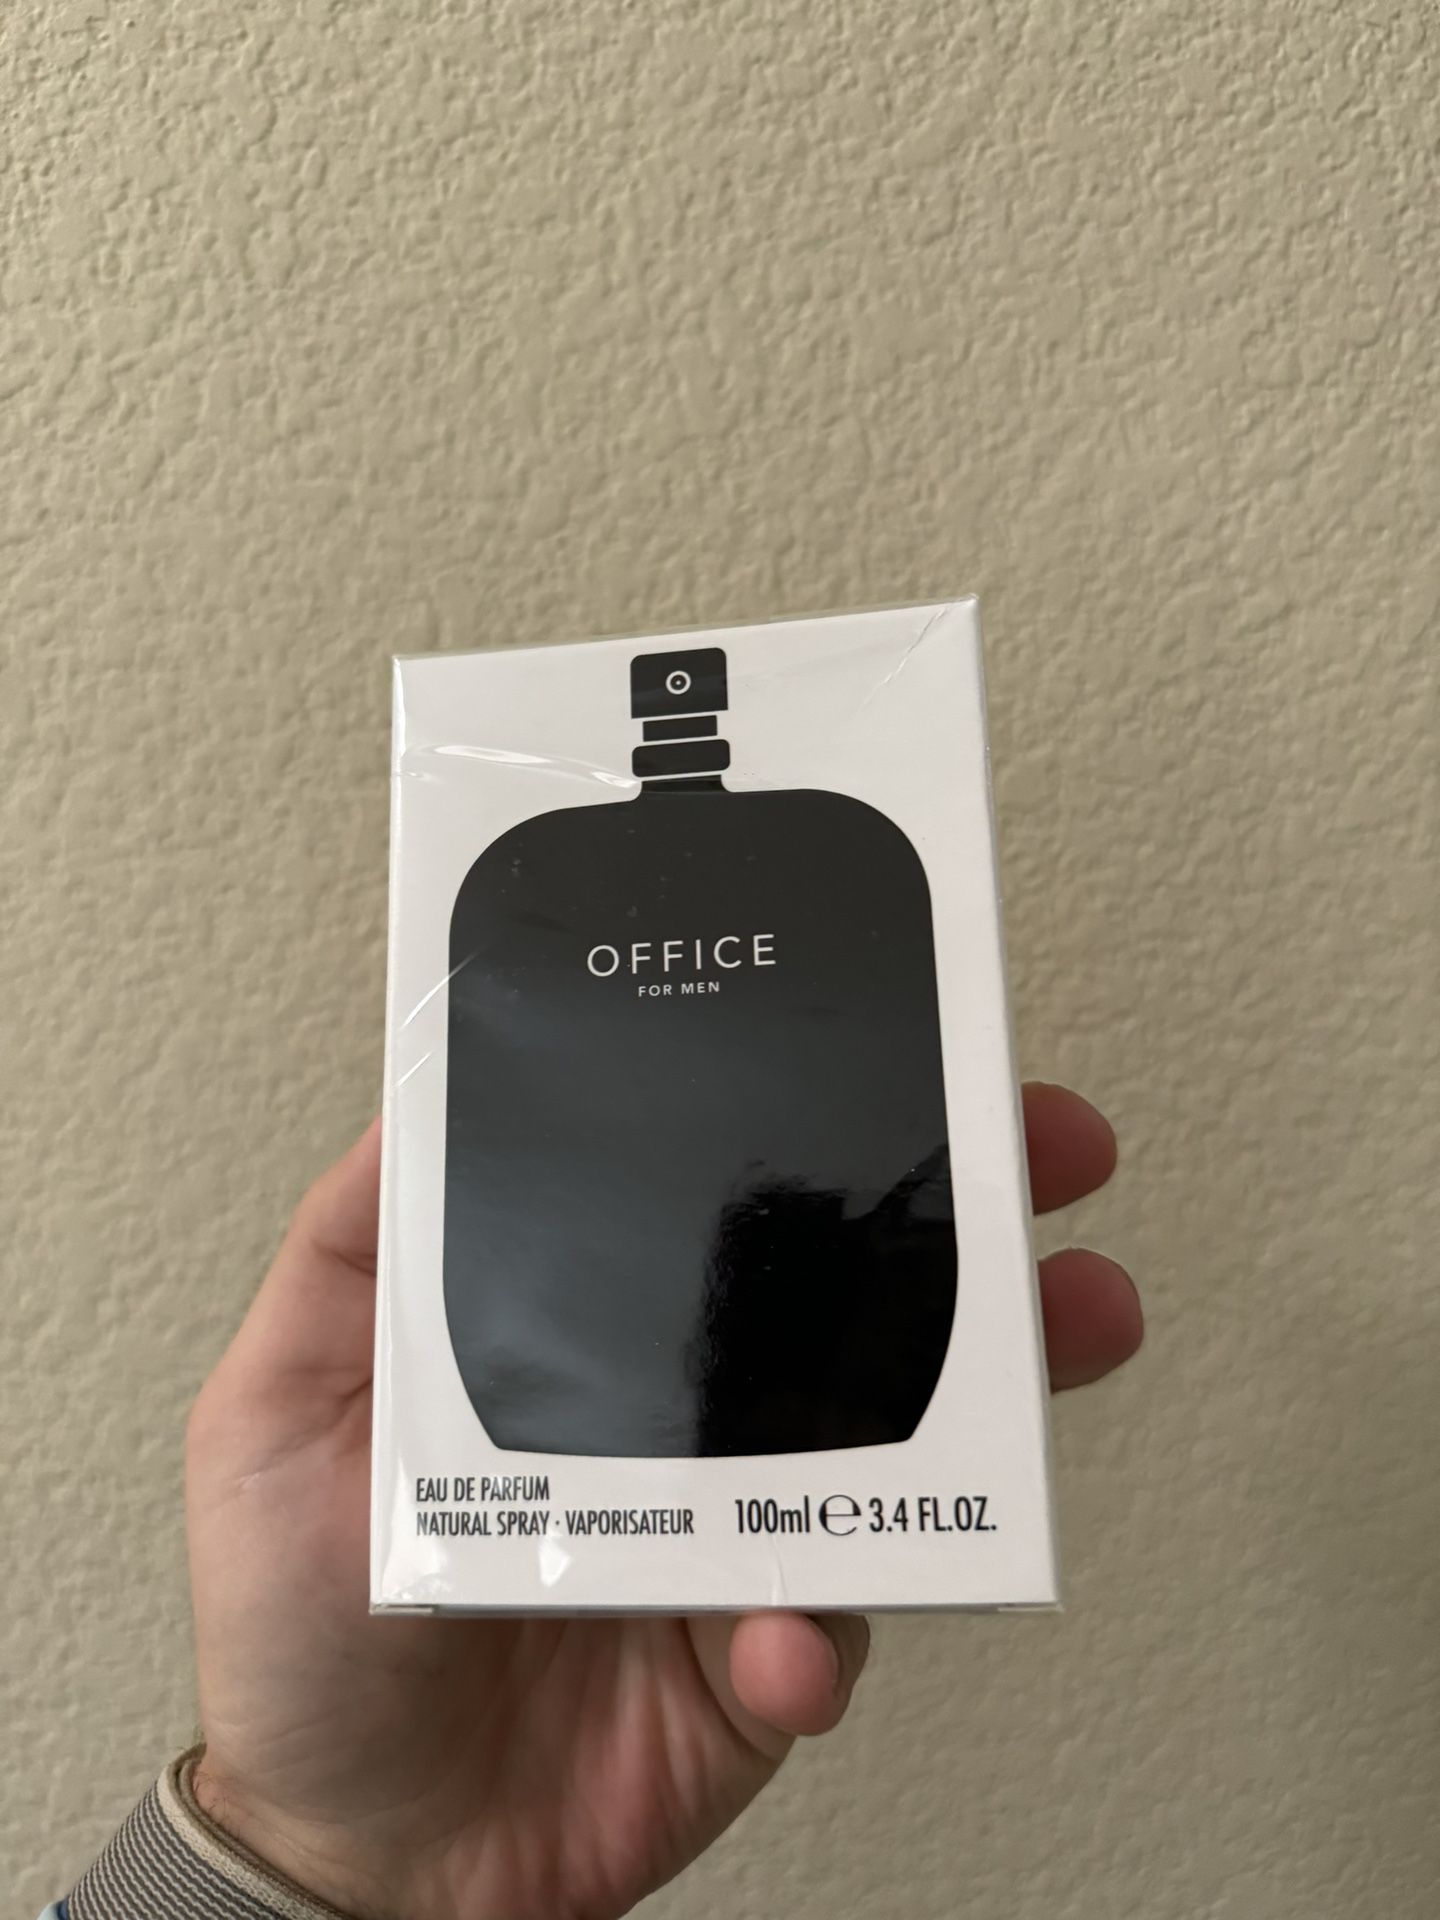 Jeremy Fragrance The Office Cologne New